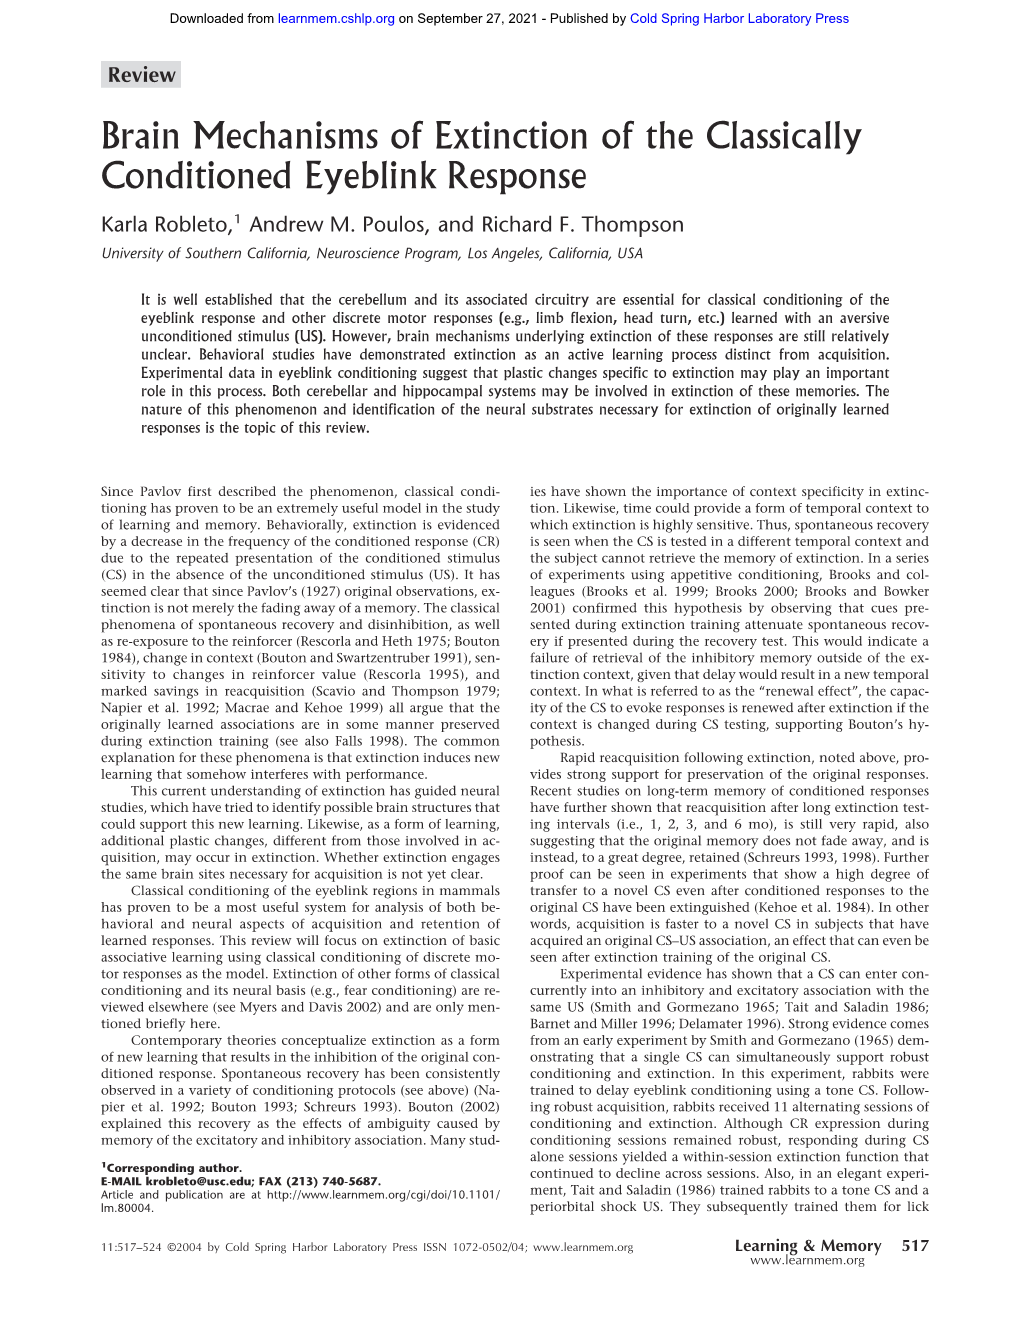 Brain Mechanisms of Extinction of the Classically Conditioned Eyeblink Response Karla Robleto,1 Andrew M